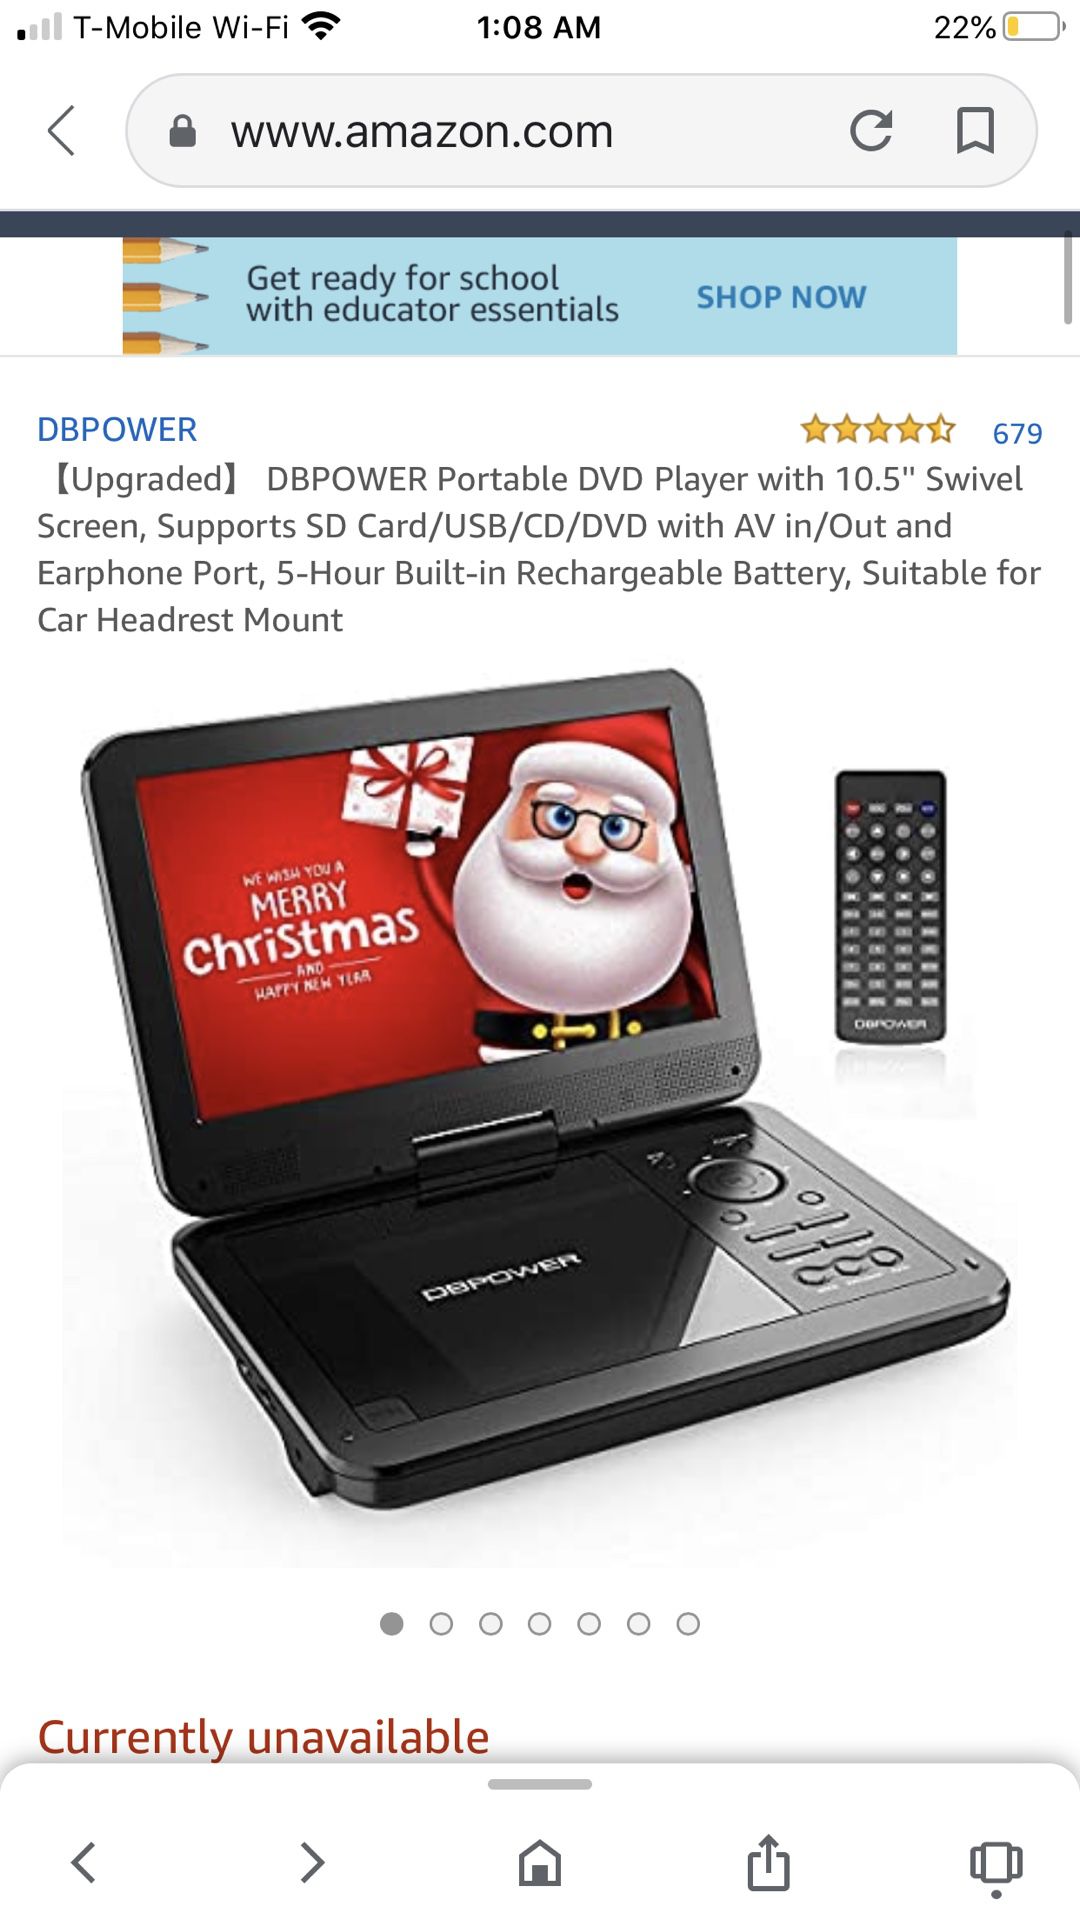 Portable DVD player works but has a cracked screen